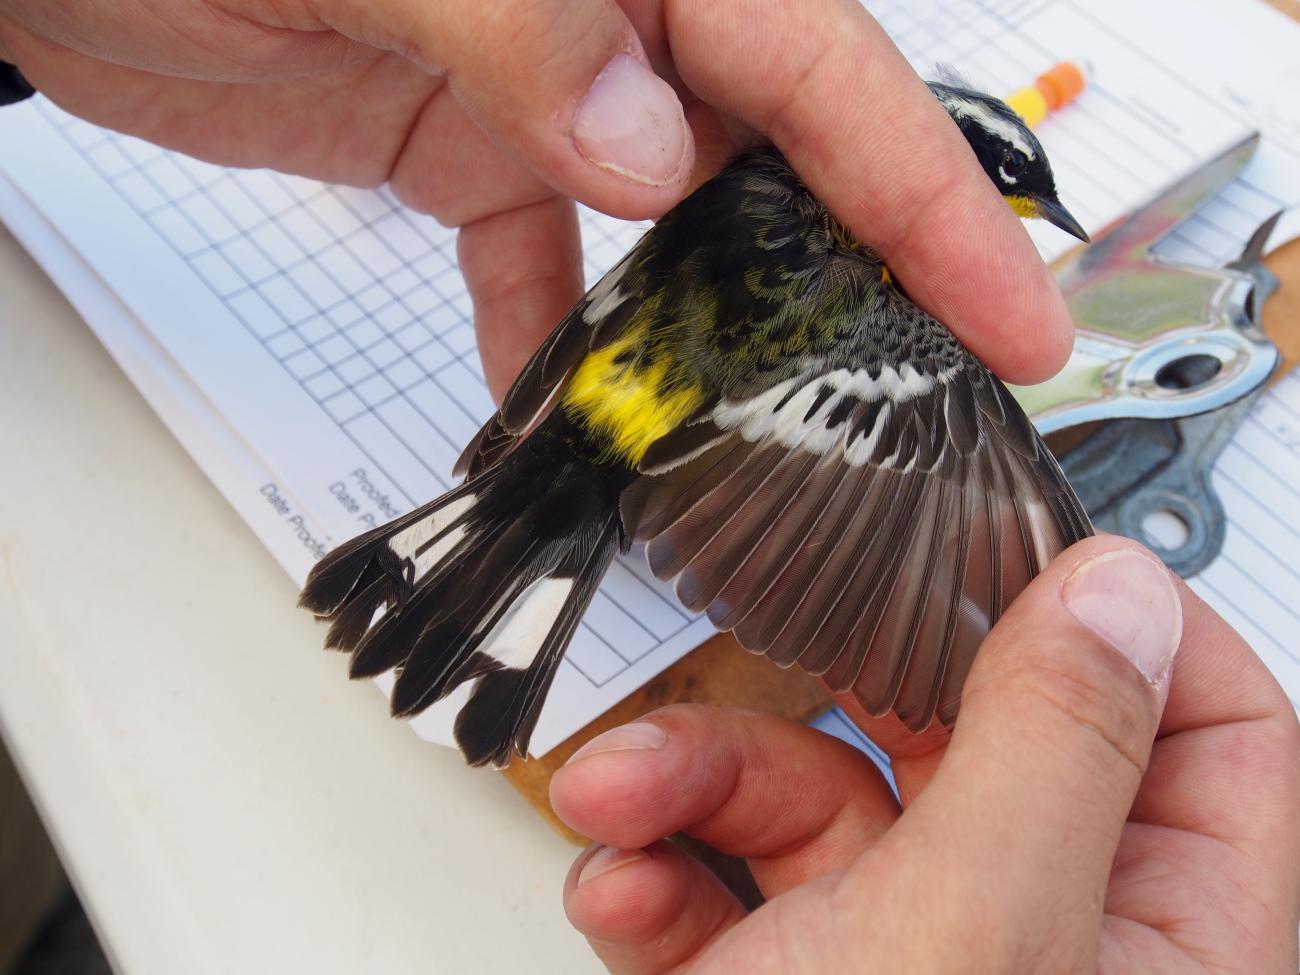 A scientist determines the age of a bird by examining its feathers